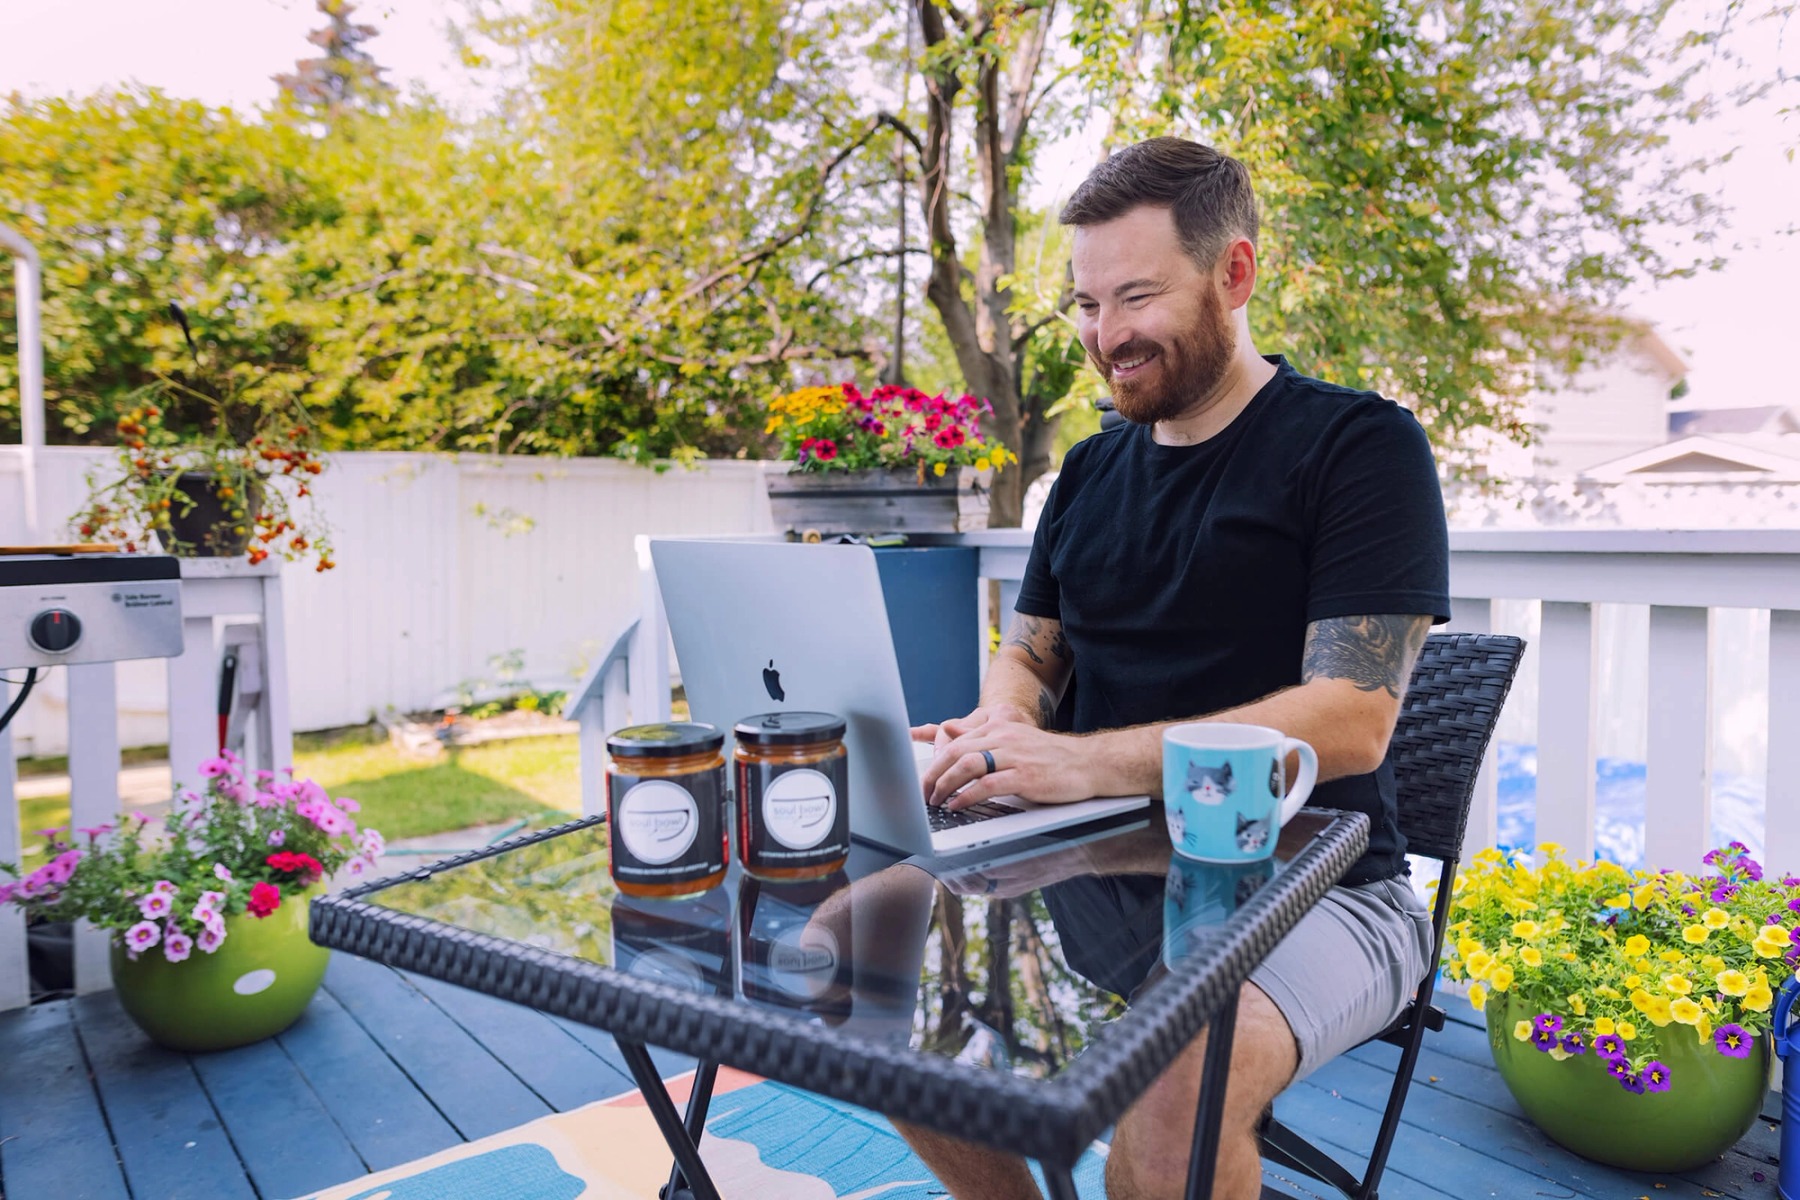 A man with a black shirt and red beard types on a laptop at a patio table in a backyard, surrounded by flower pots.